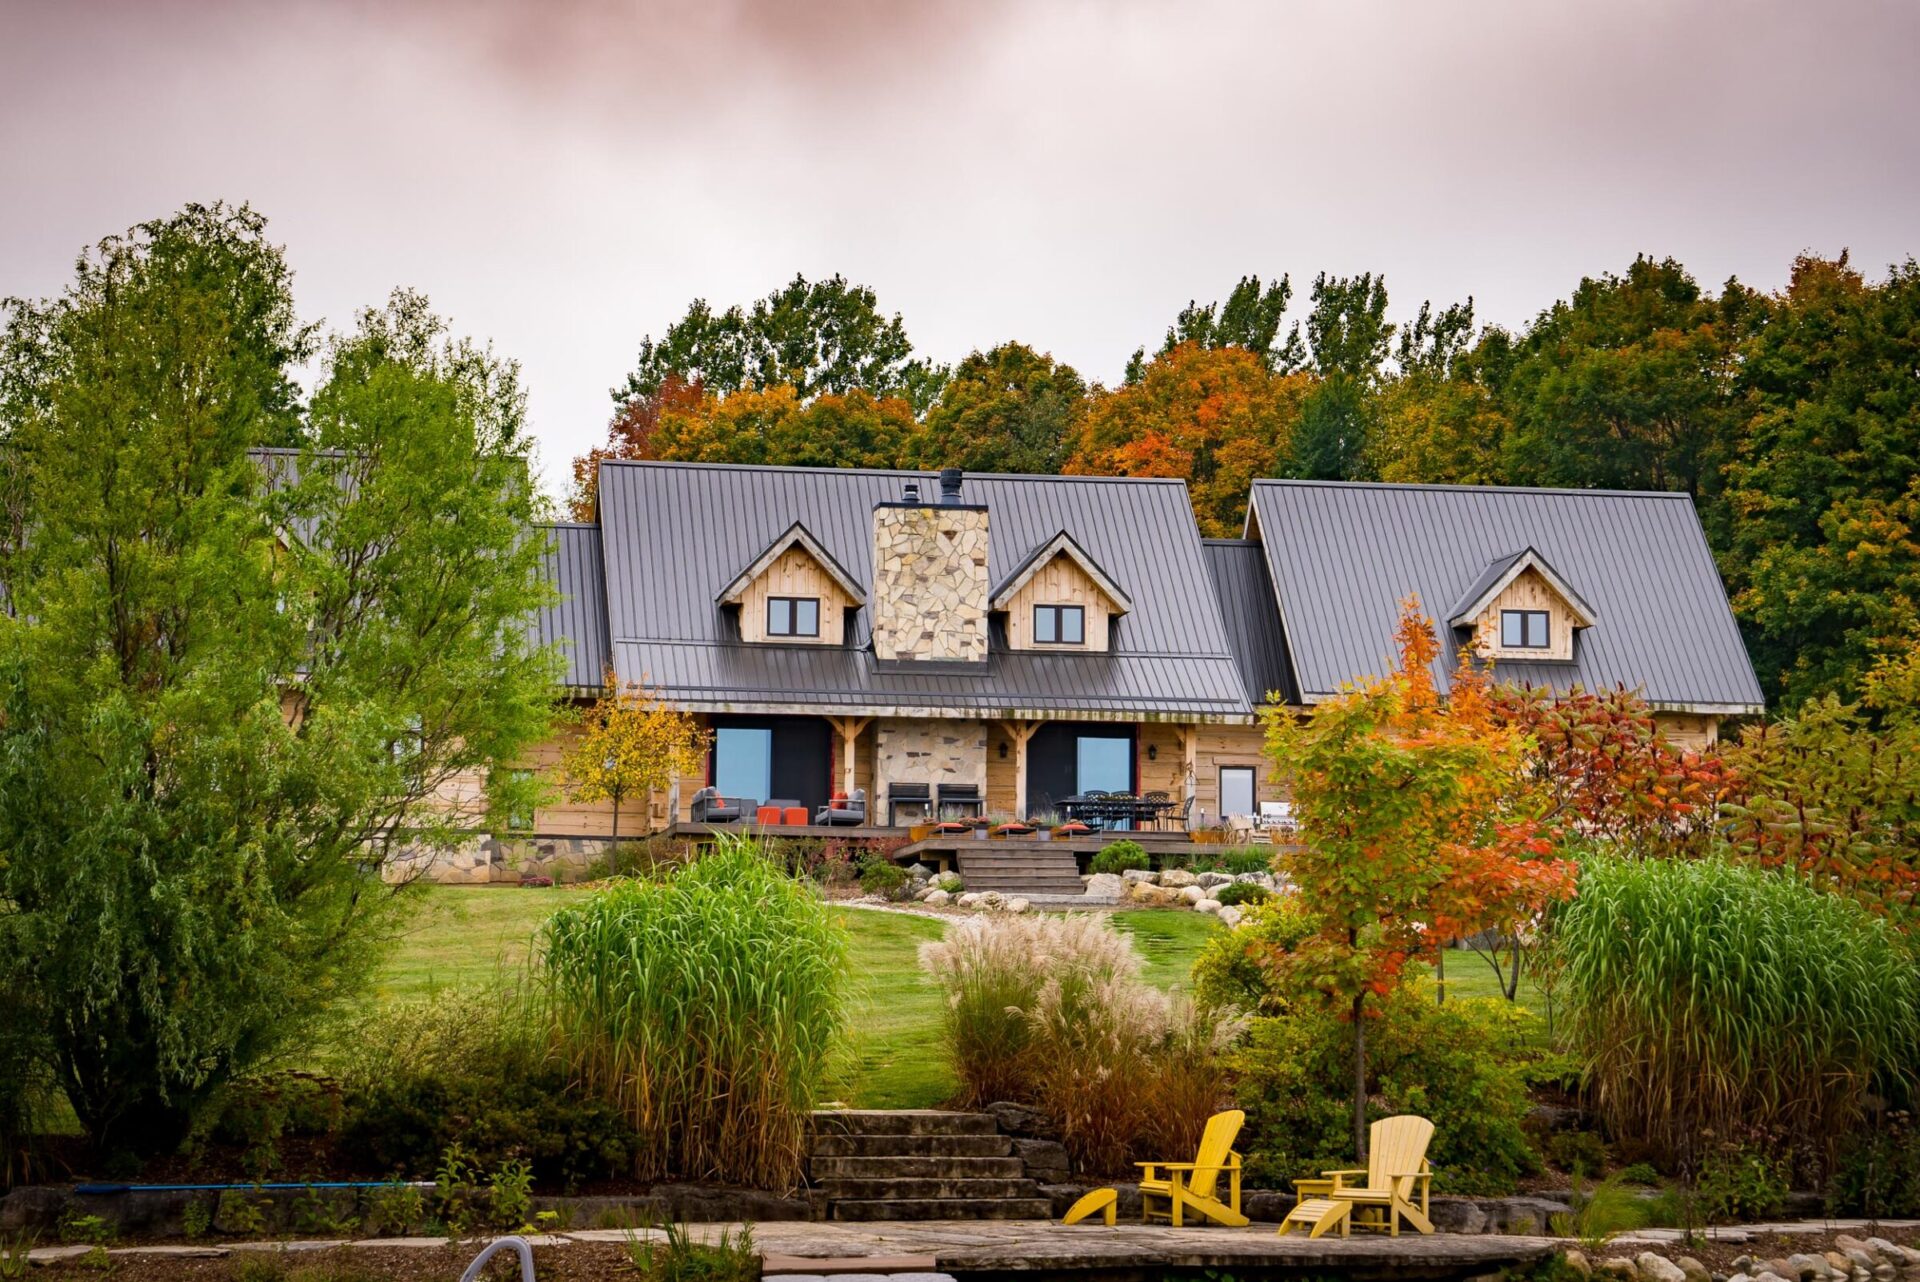 A rural stone house with a metal roof surrounded by lush autumn-colored foliage and a well-manicured lawn featuring Adirondack chairs and stone steps.